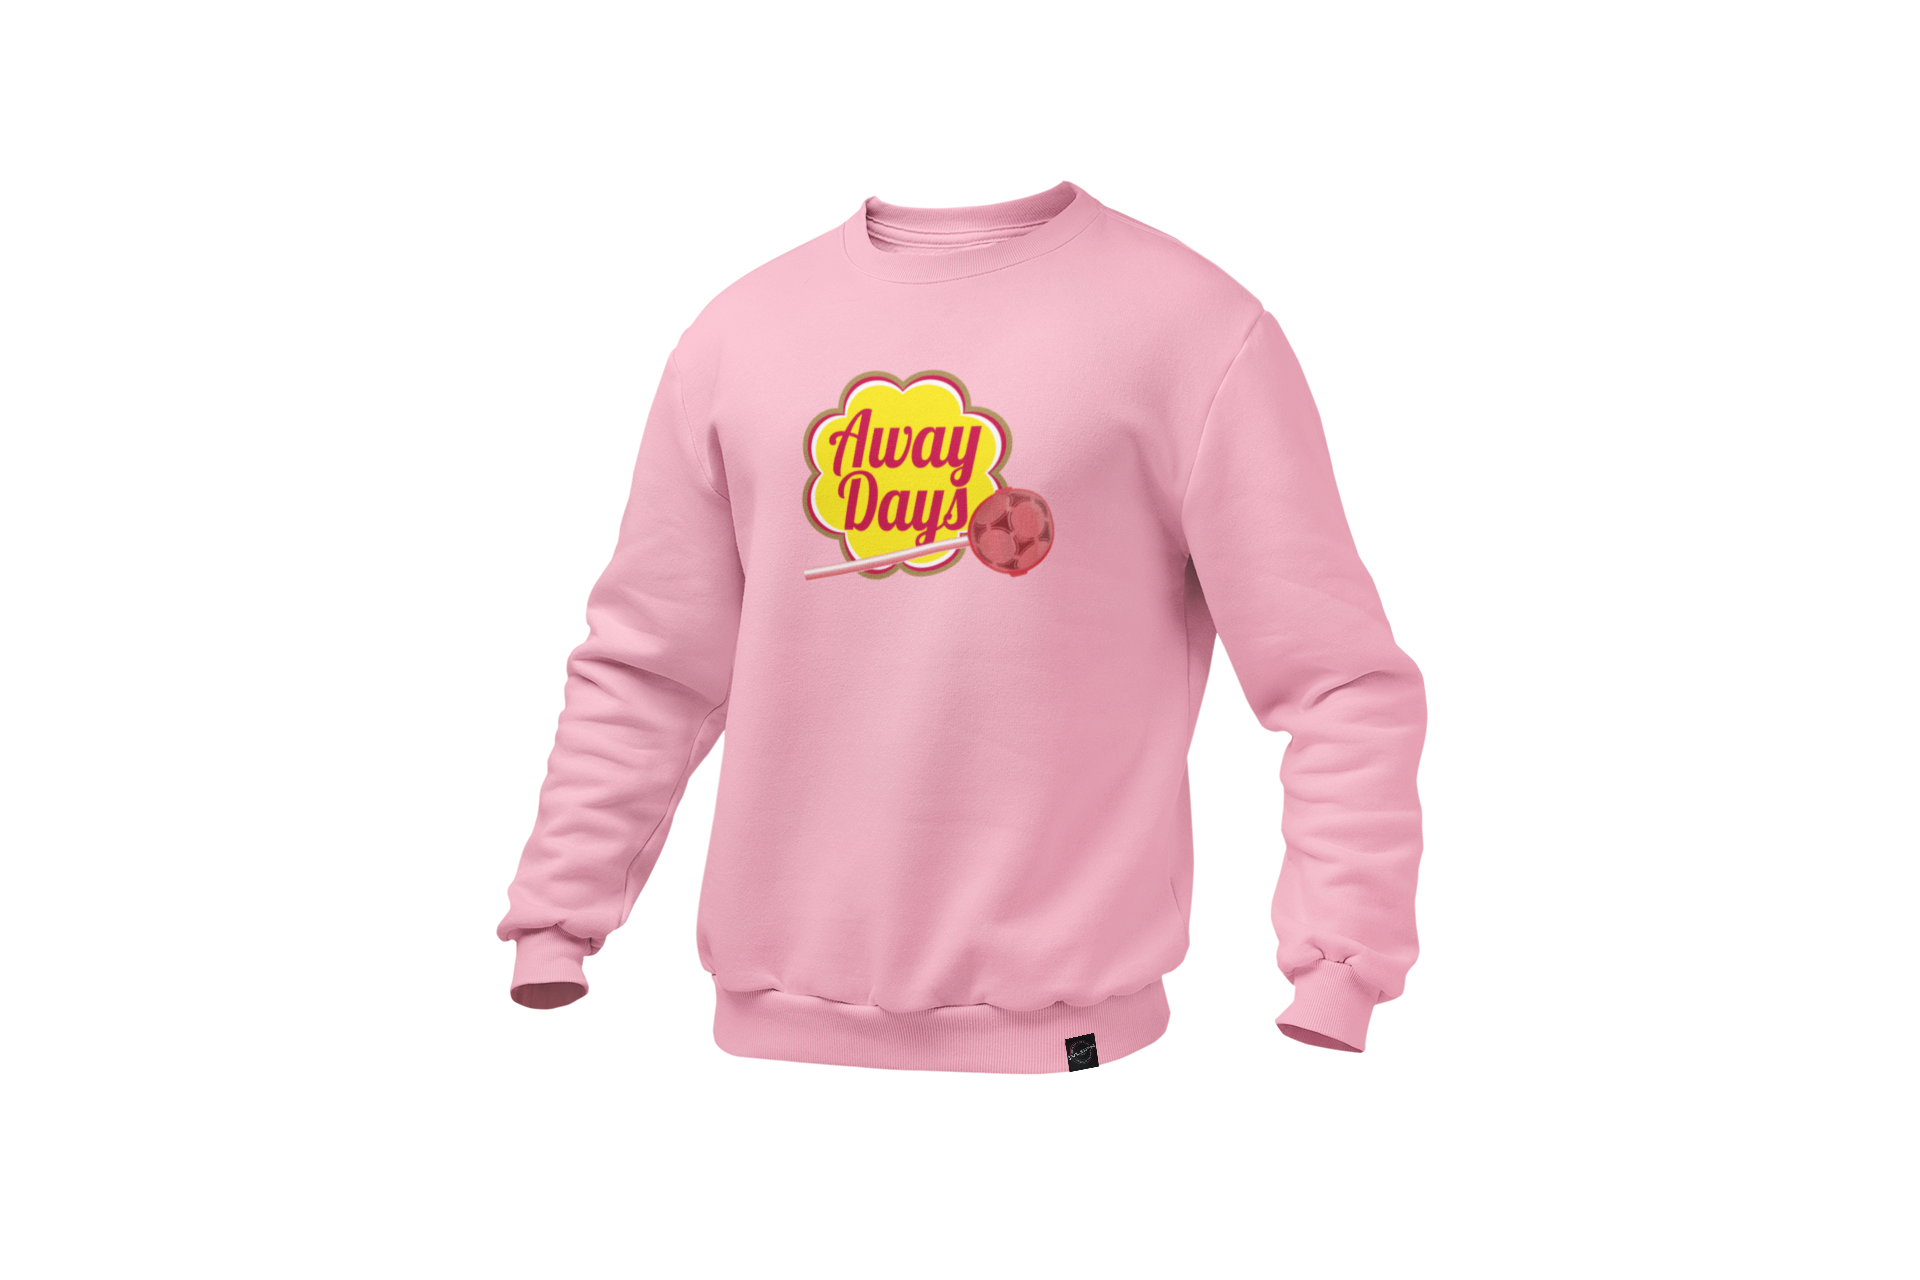 mockup-of-a-ghosted-crewneck-sweatshirt-over-a-solid-background-26960 - 2020-11-06T163750.519.png